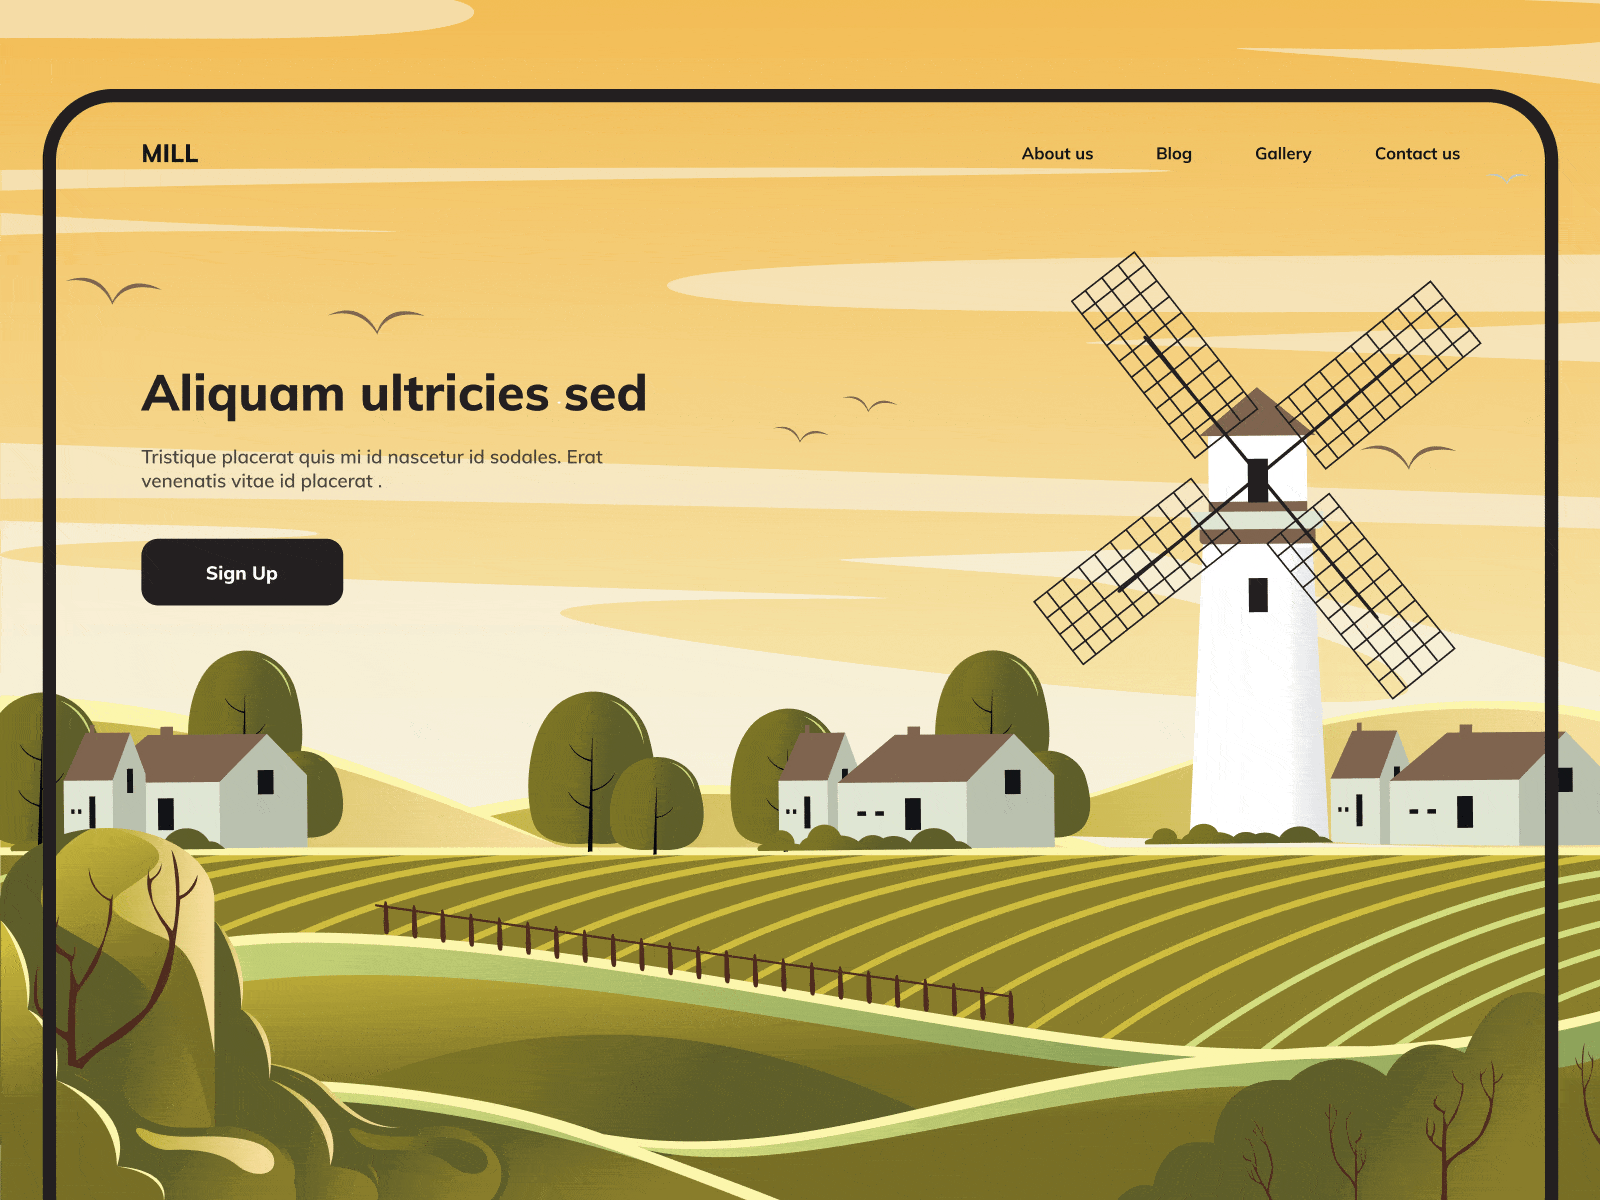 MILL - Web Design with Illustration - Hero Section